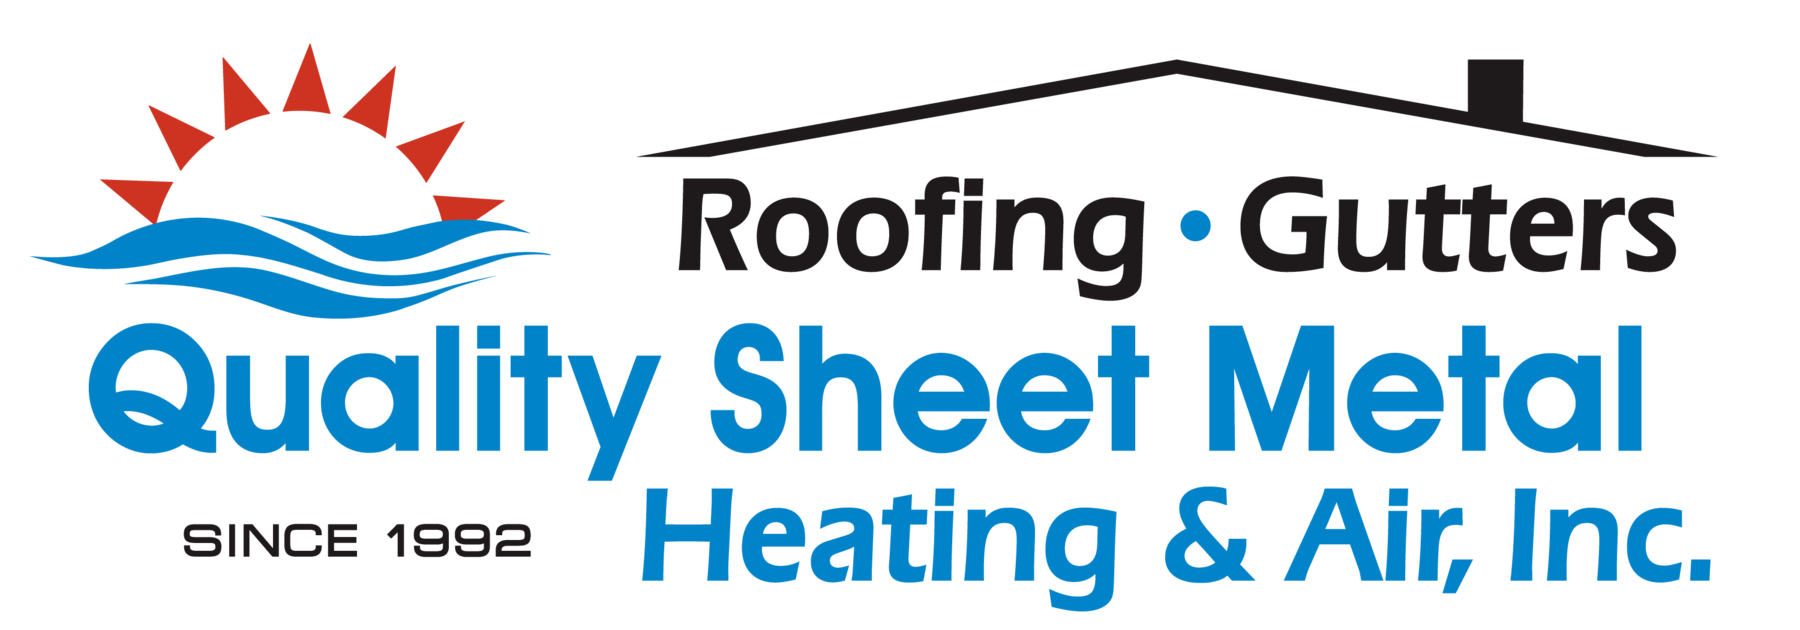 Heating and Cooling Rocklin, CA & Lincoln, CA, HVAC Service Roseville, CA & Loomis, CA Air